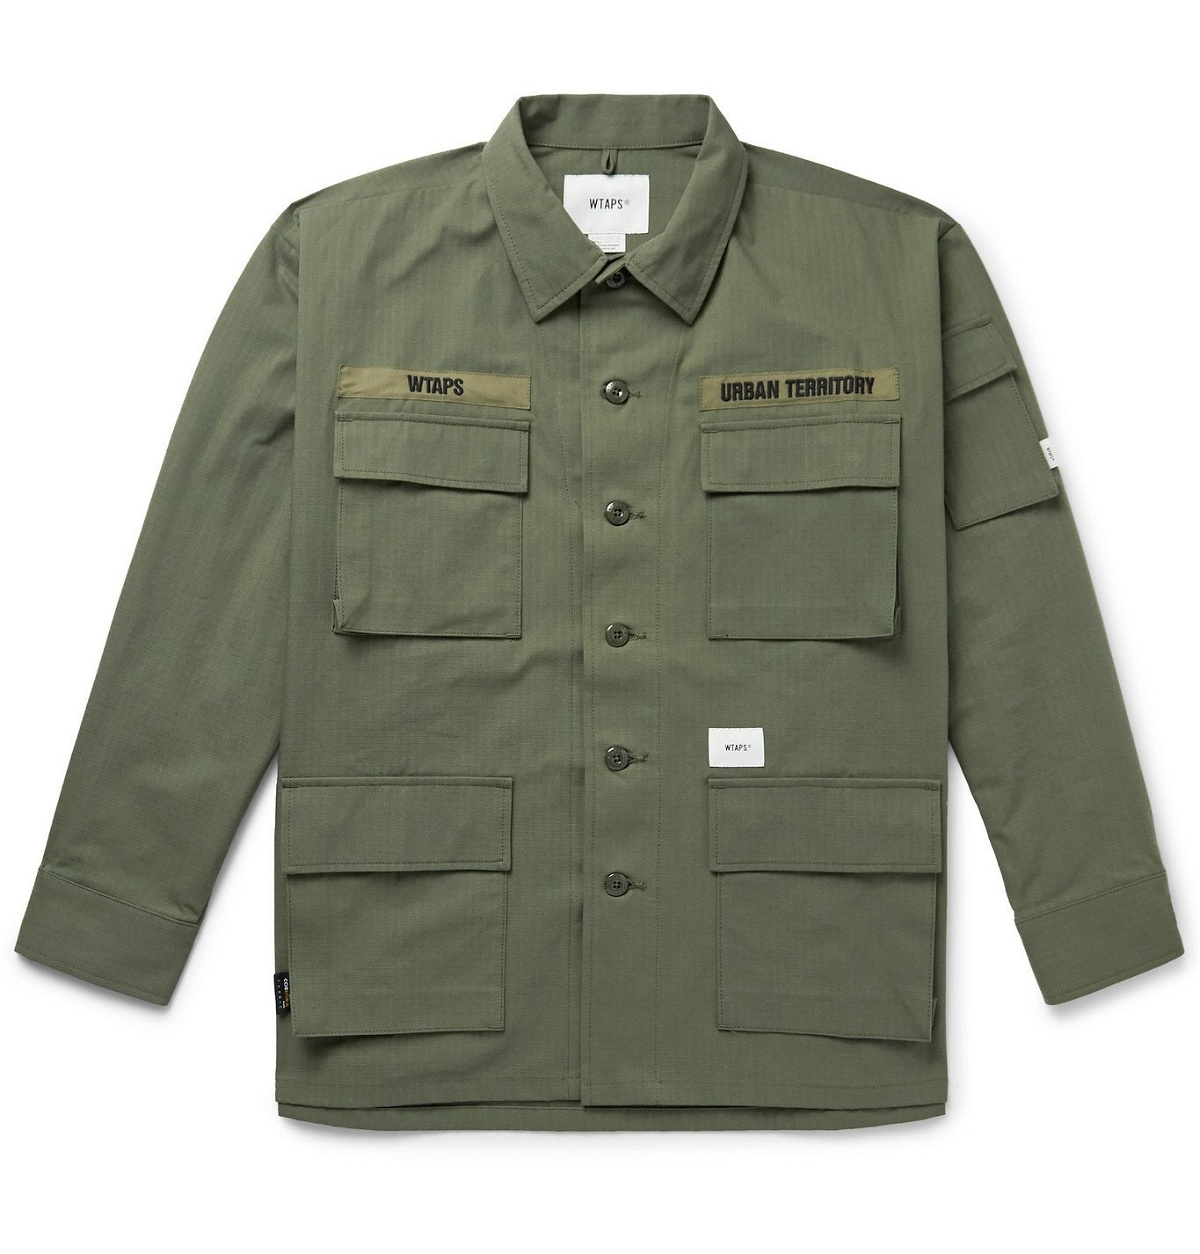 WTAPS - Jungle Embroidered CORDURA and Cotton-Blend Ripstop 